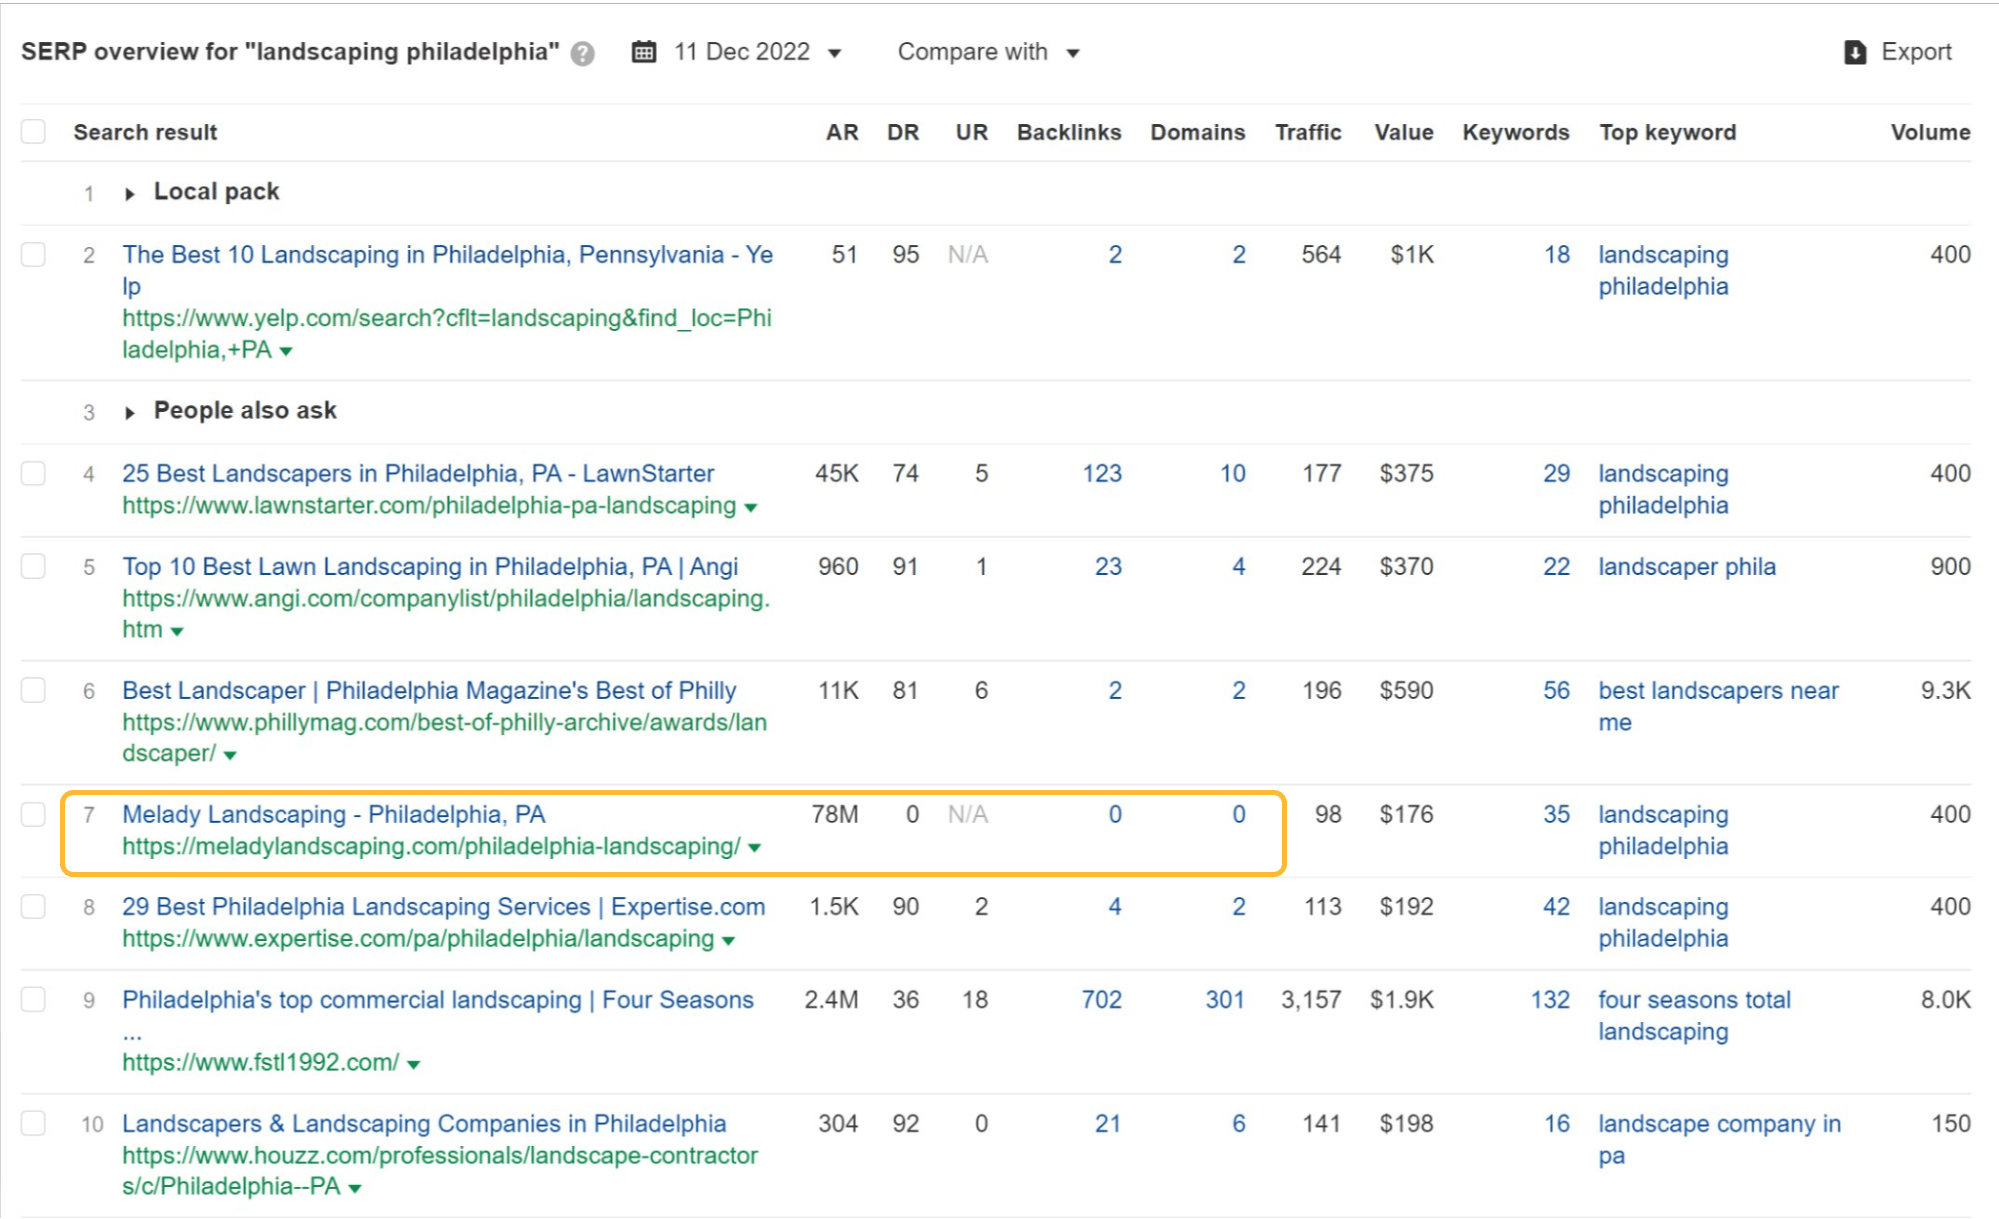 SERP overview for "landscaping philadelphia" showing a competitor without links ranking above fstl1992.com